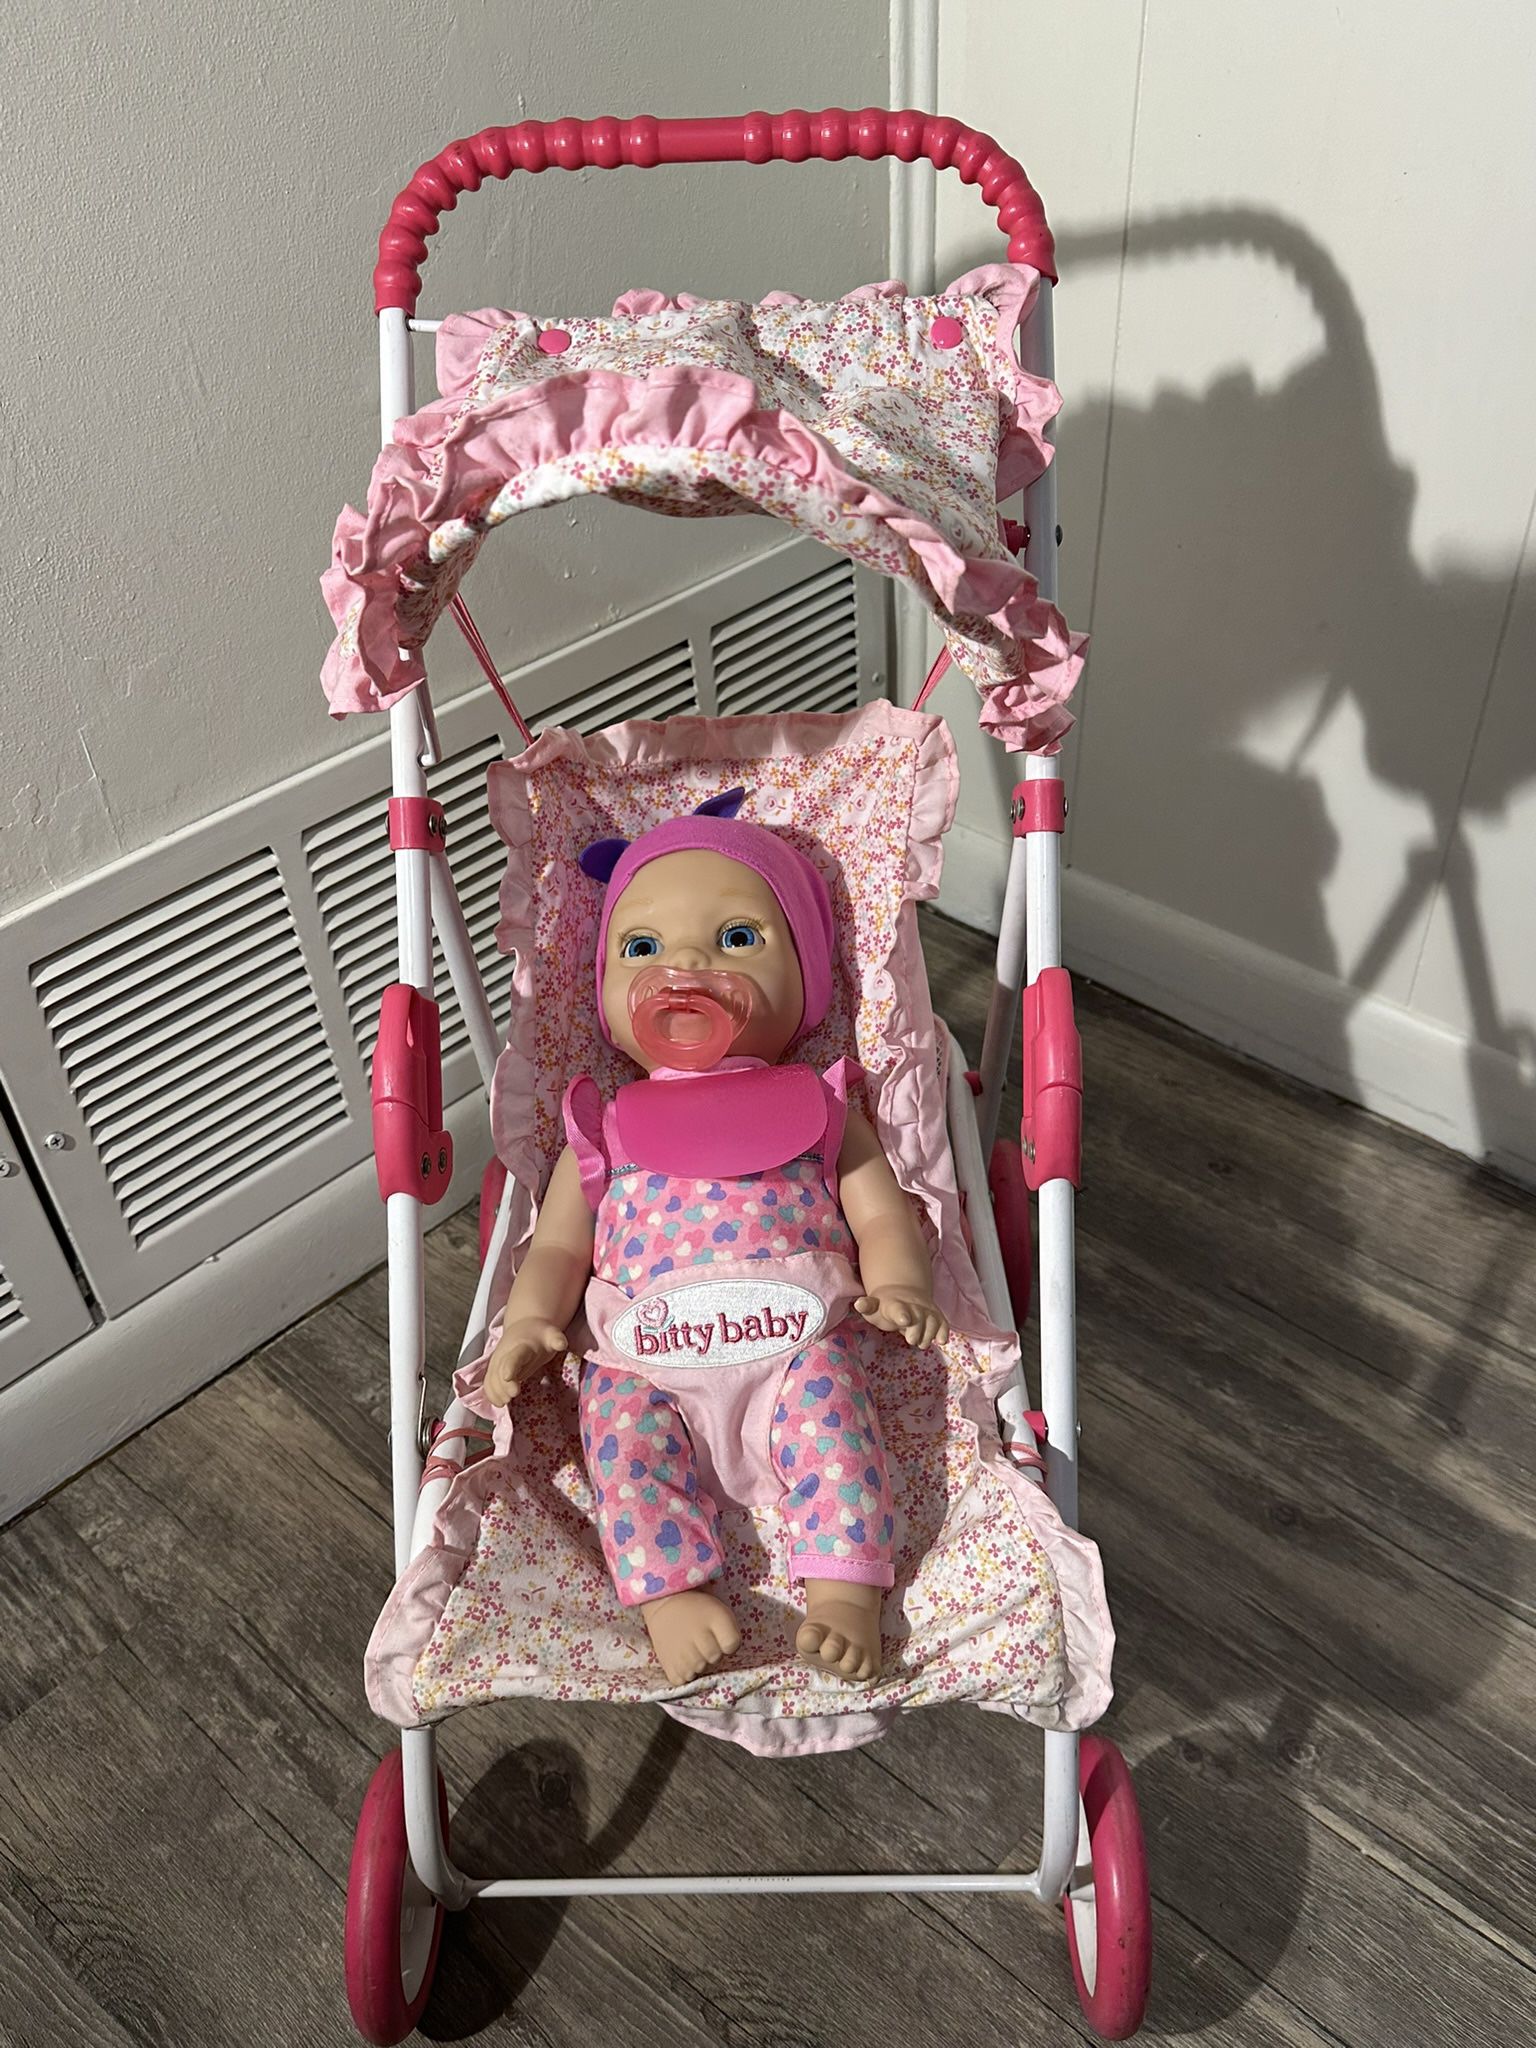 Bitty baby stroller and luvabella doll 